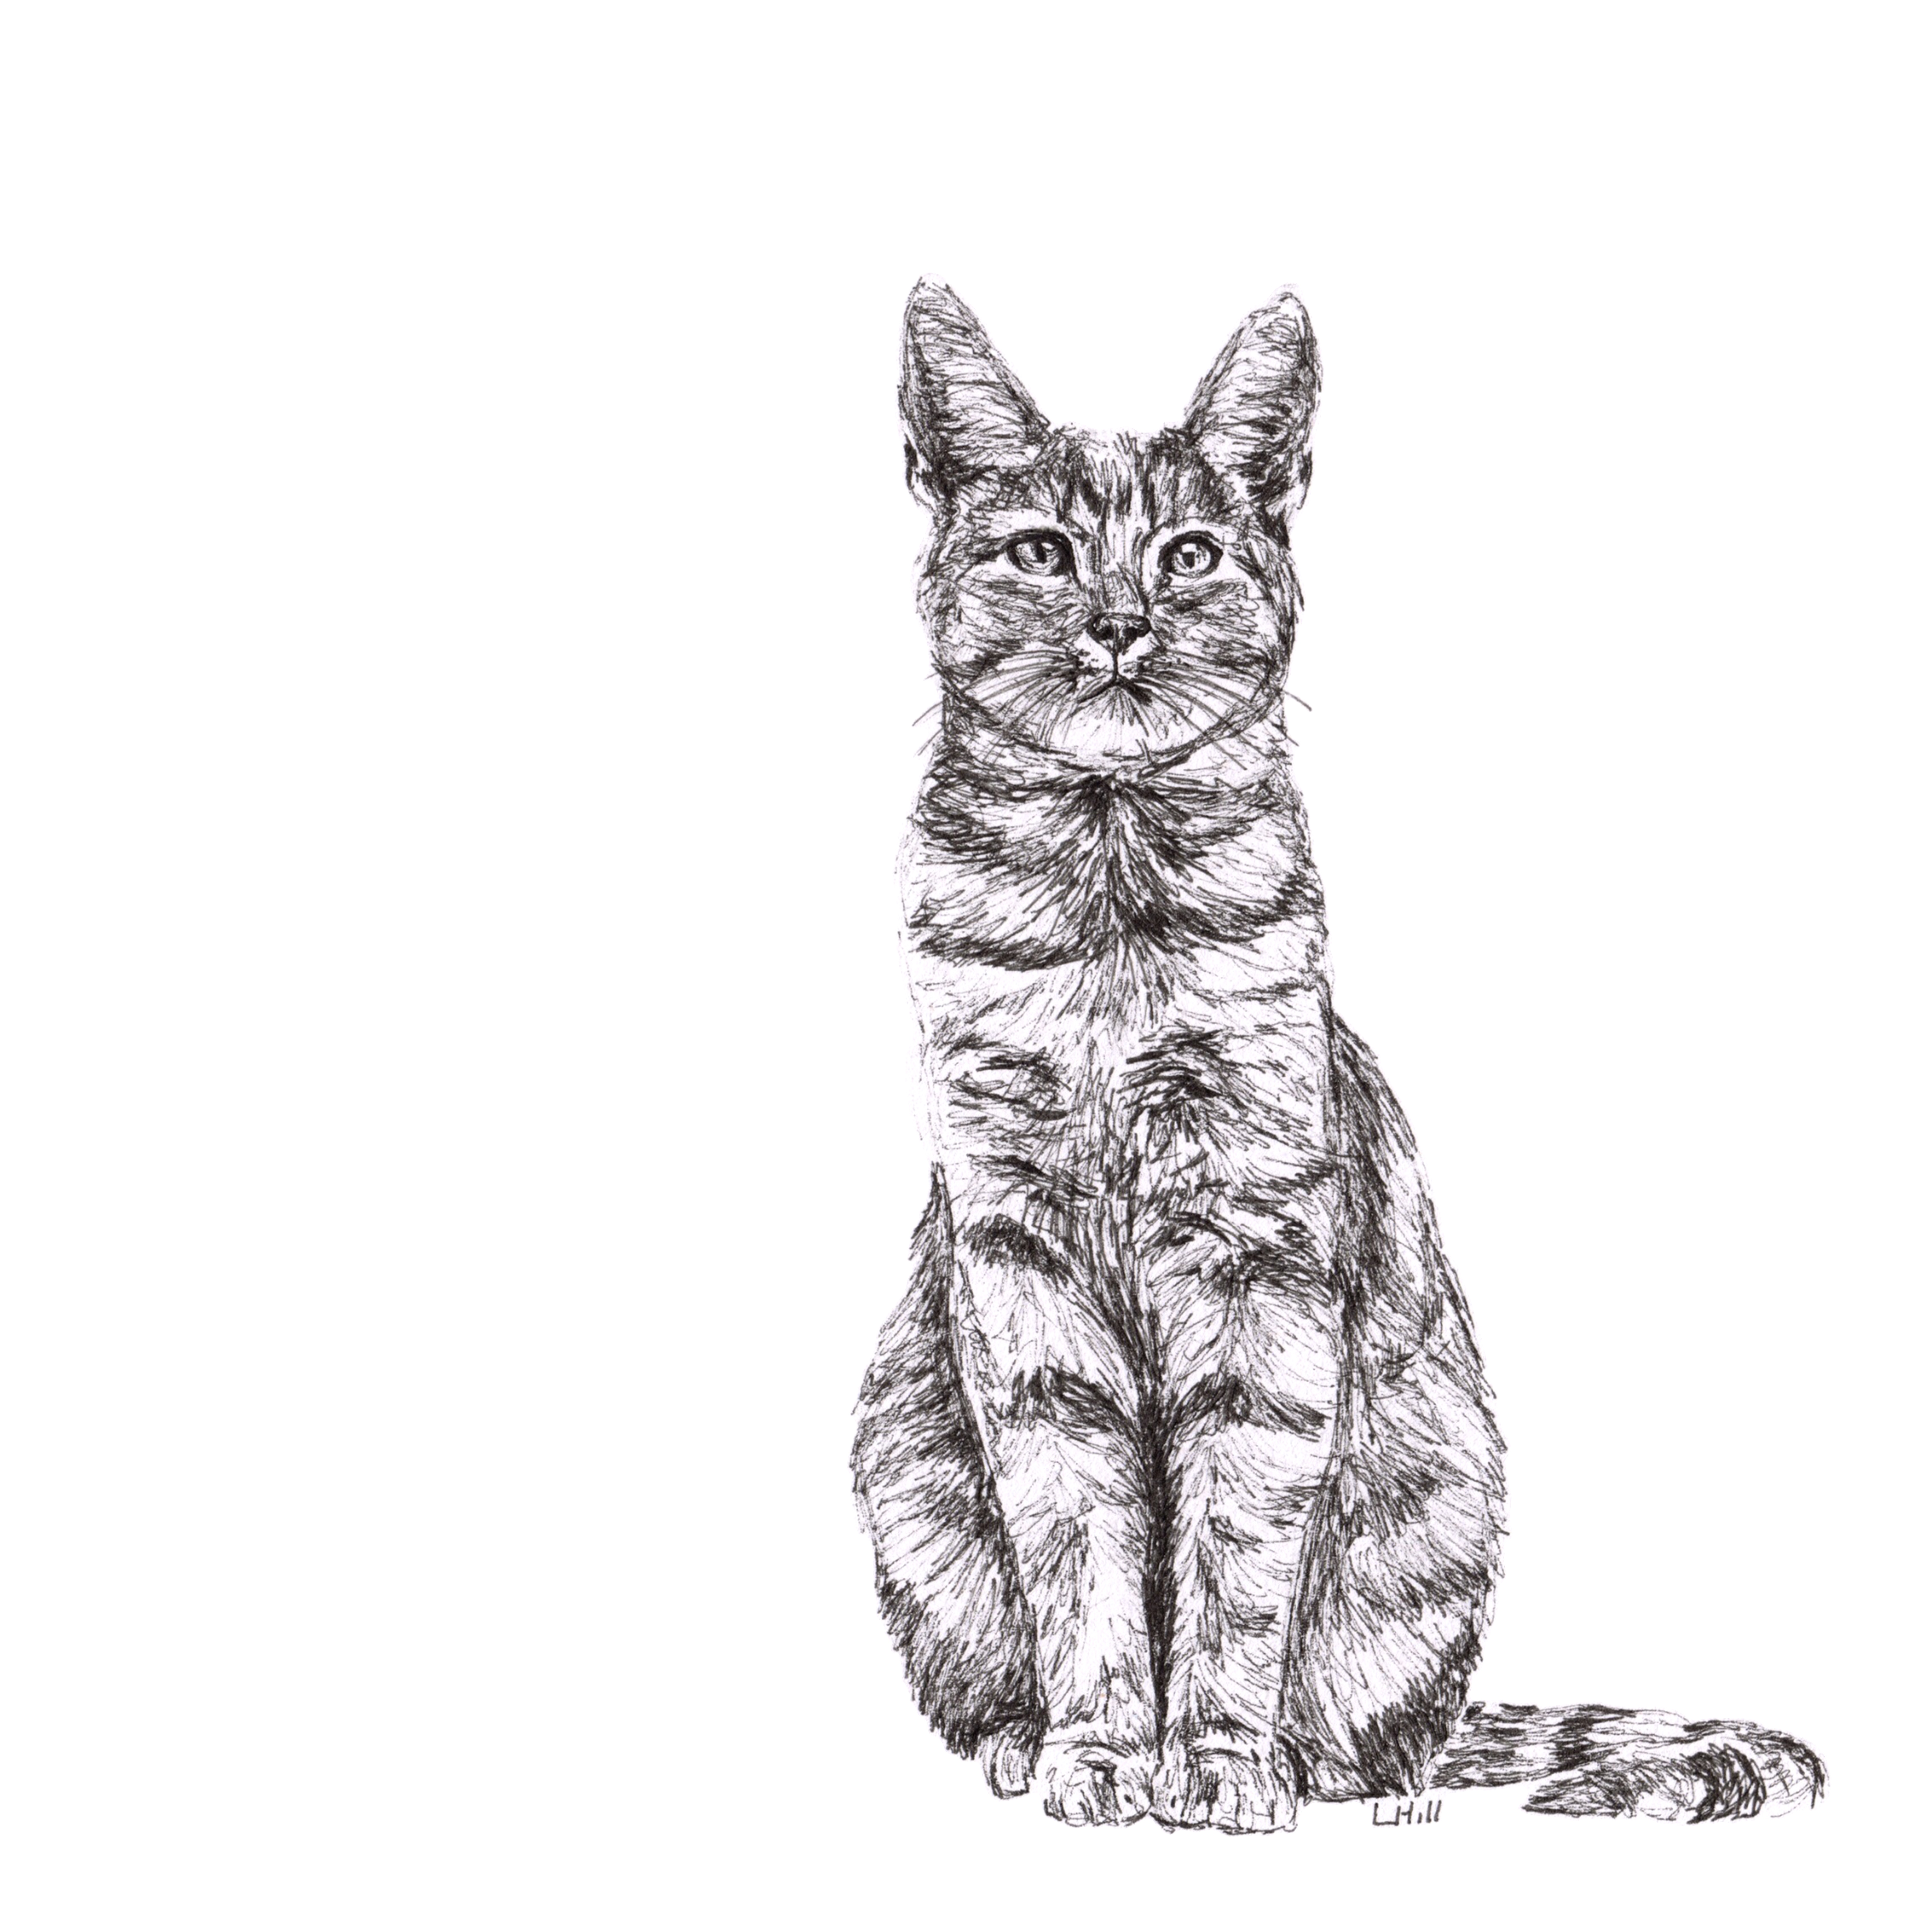 Tabby pen and ink illustration by Louisa Hill